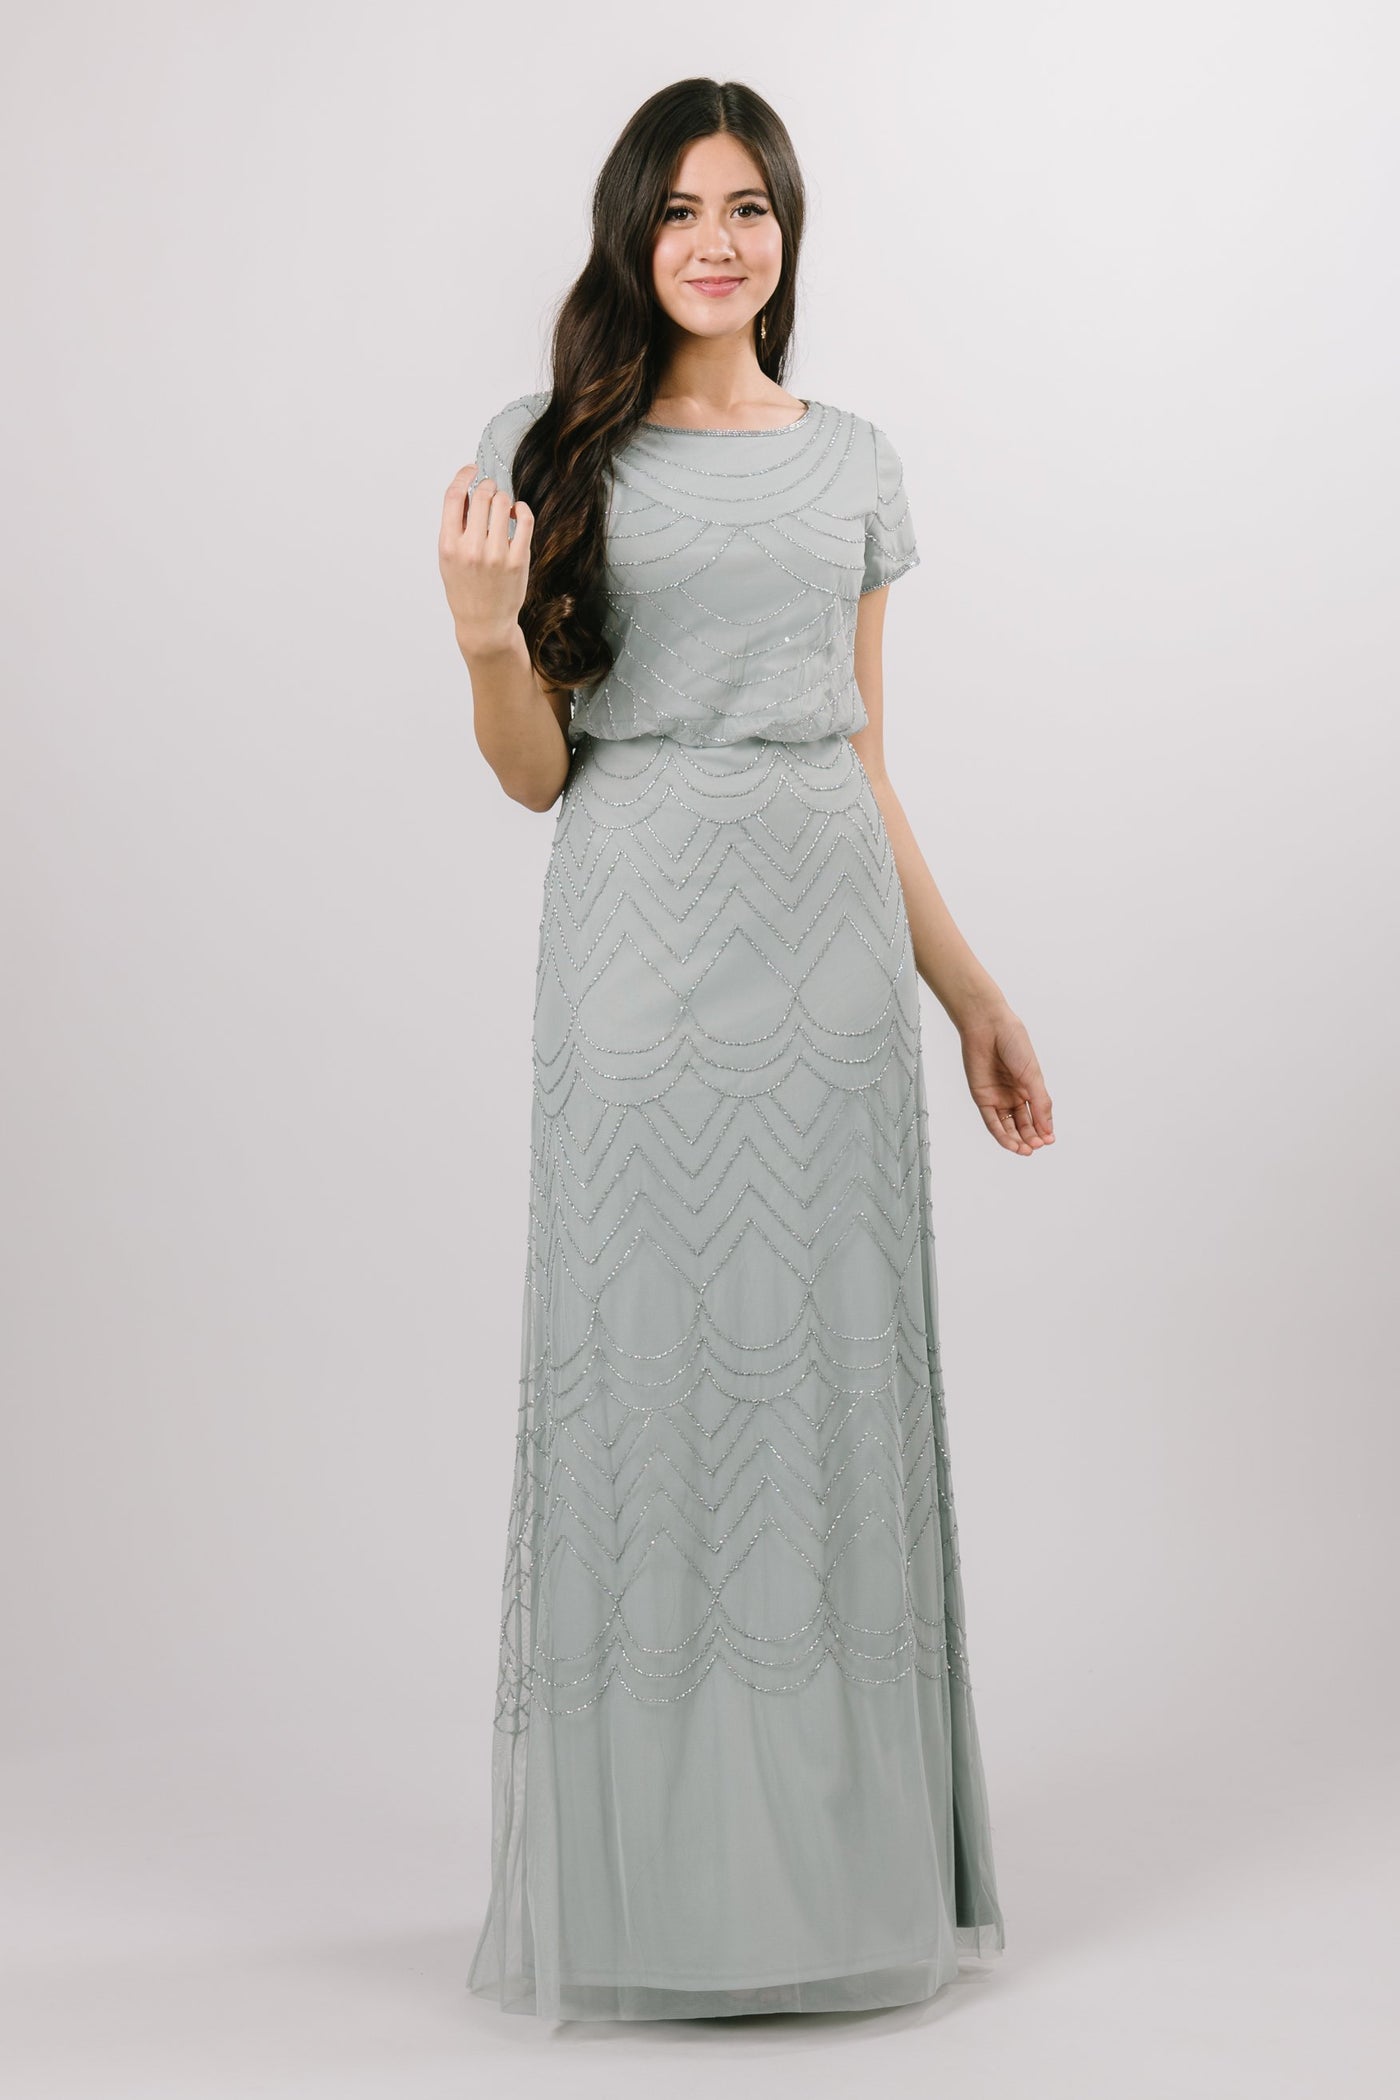 The modest bridesmaid or prom dress creates a pop over bodice and a delicate fitted skirt, not to mention the draped beaded pattern. In the color Sage. Modest Dresses - Modest Clothing - Modest Formalwear Dresses - Bridesmaid Modest Dresses. 